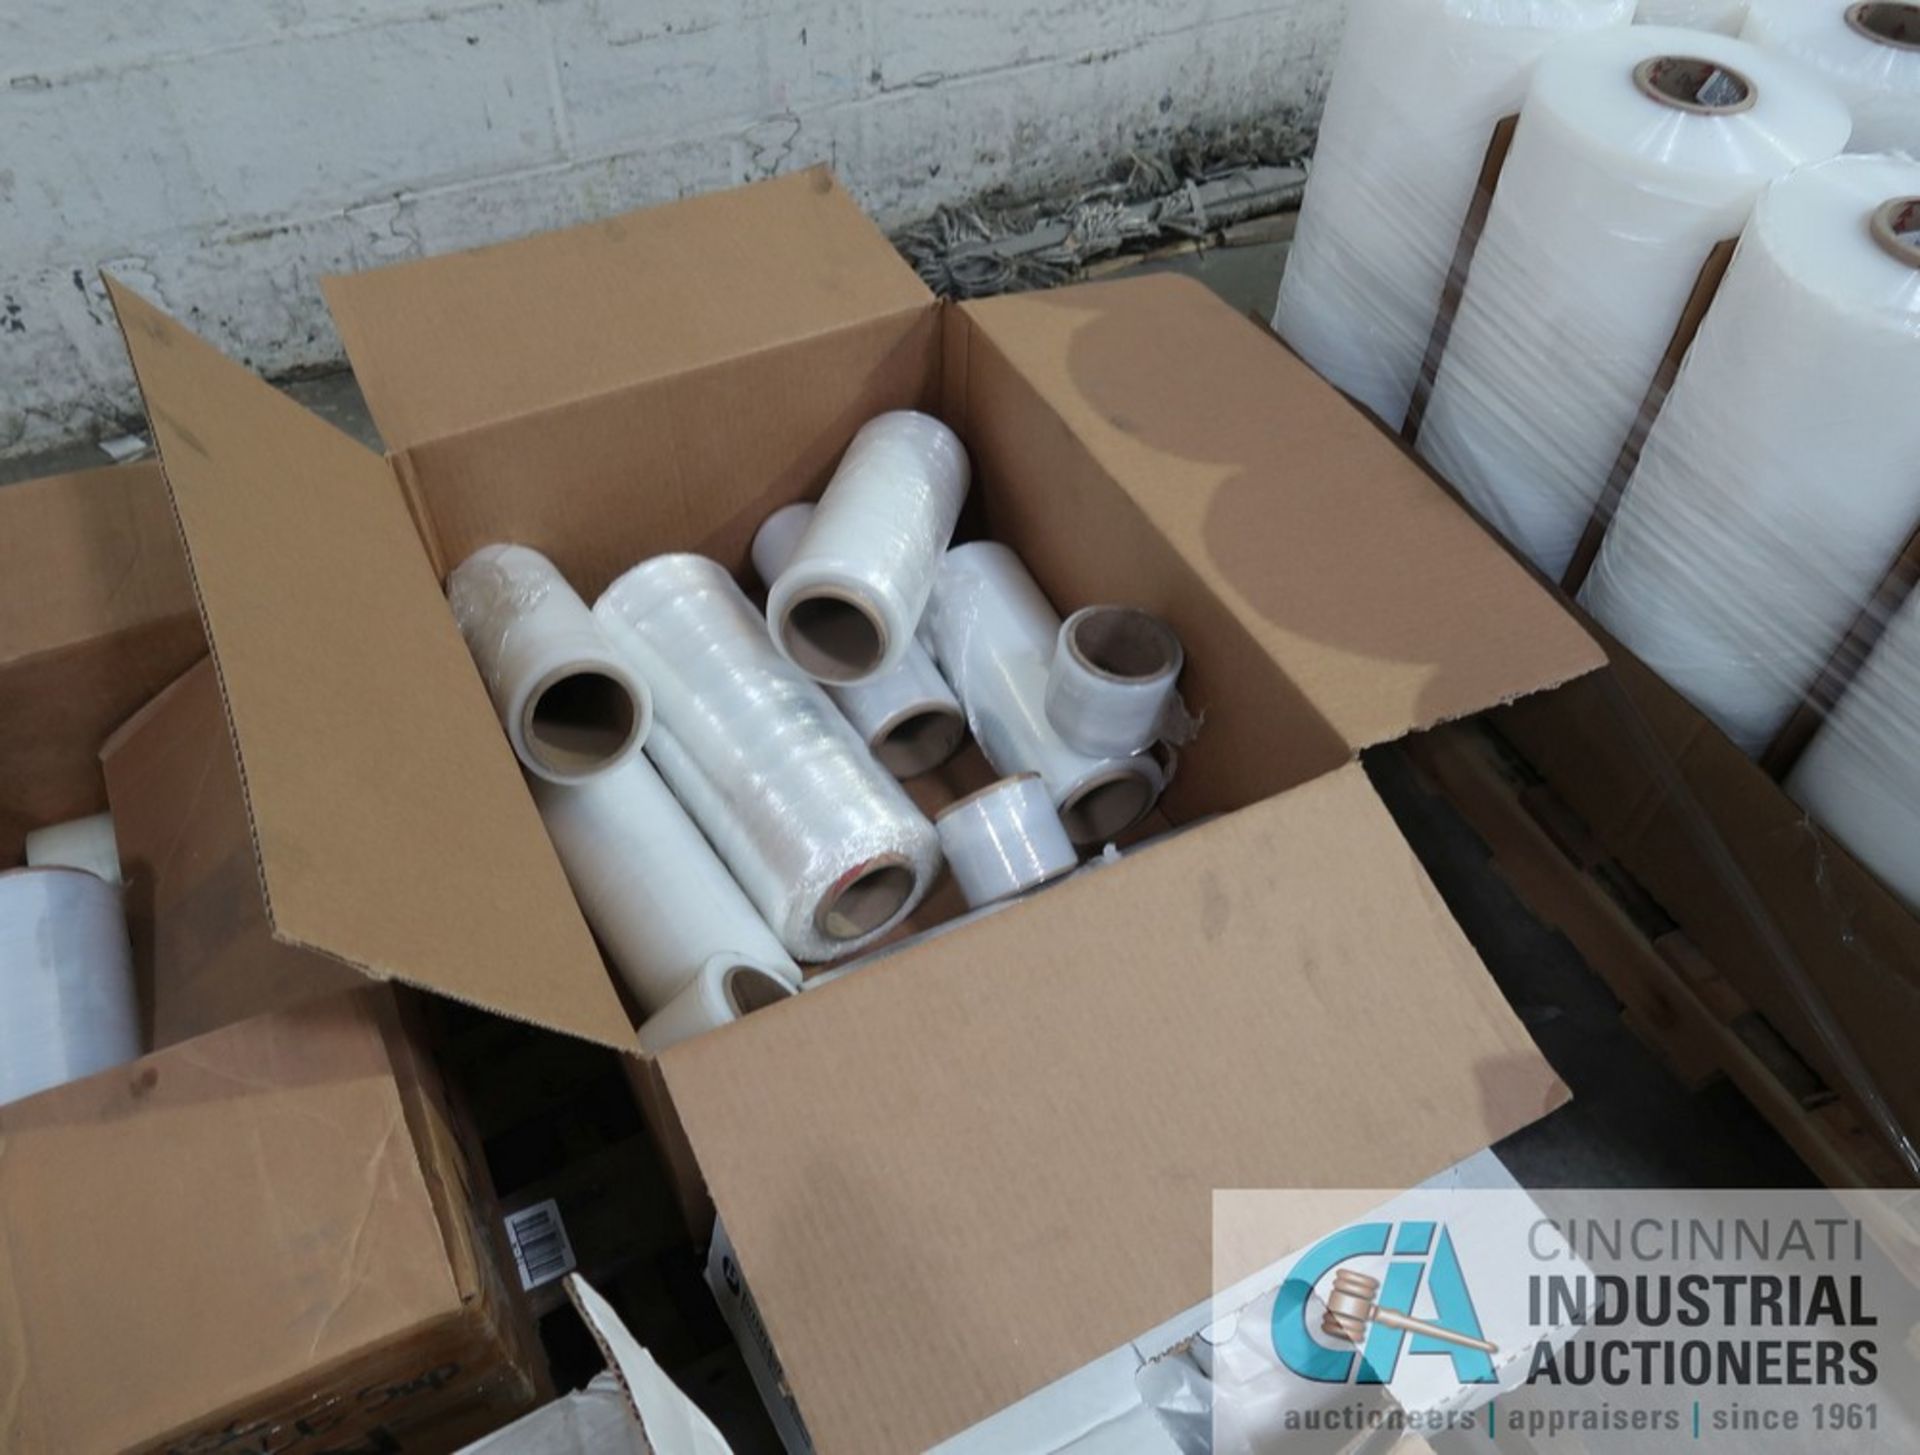 ROLLS 20" STRETCH WRAP FILM WITH (1) SKID MISCELLANEOUS STRETCH WRAP AND TAPE - Image 4 of 5